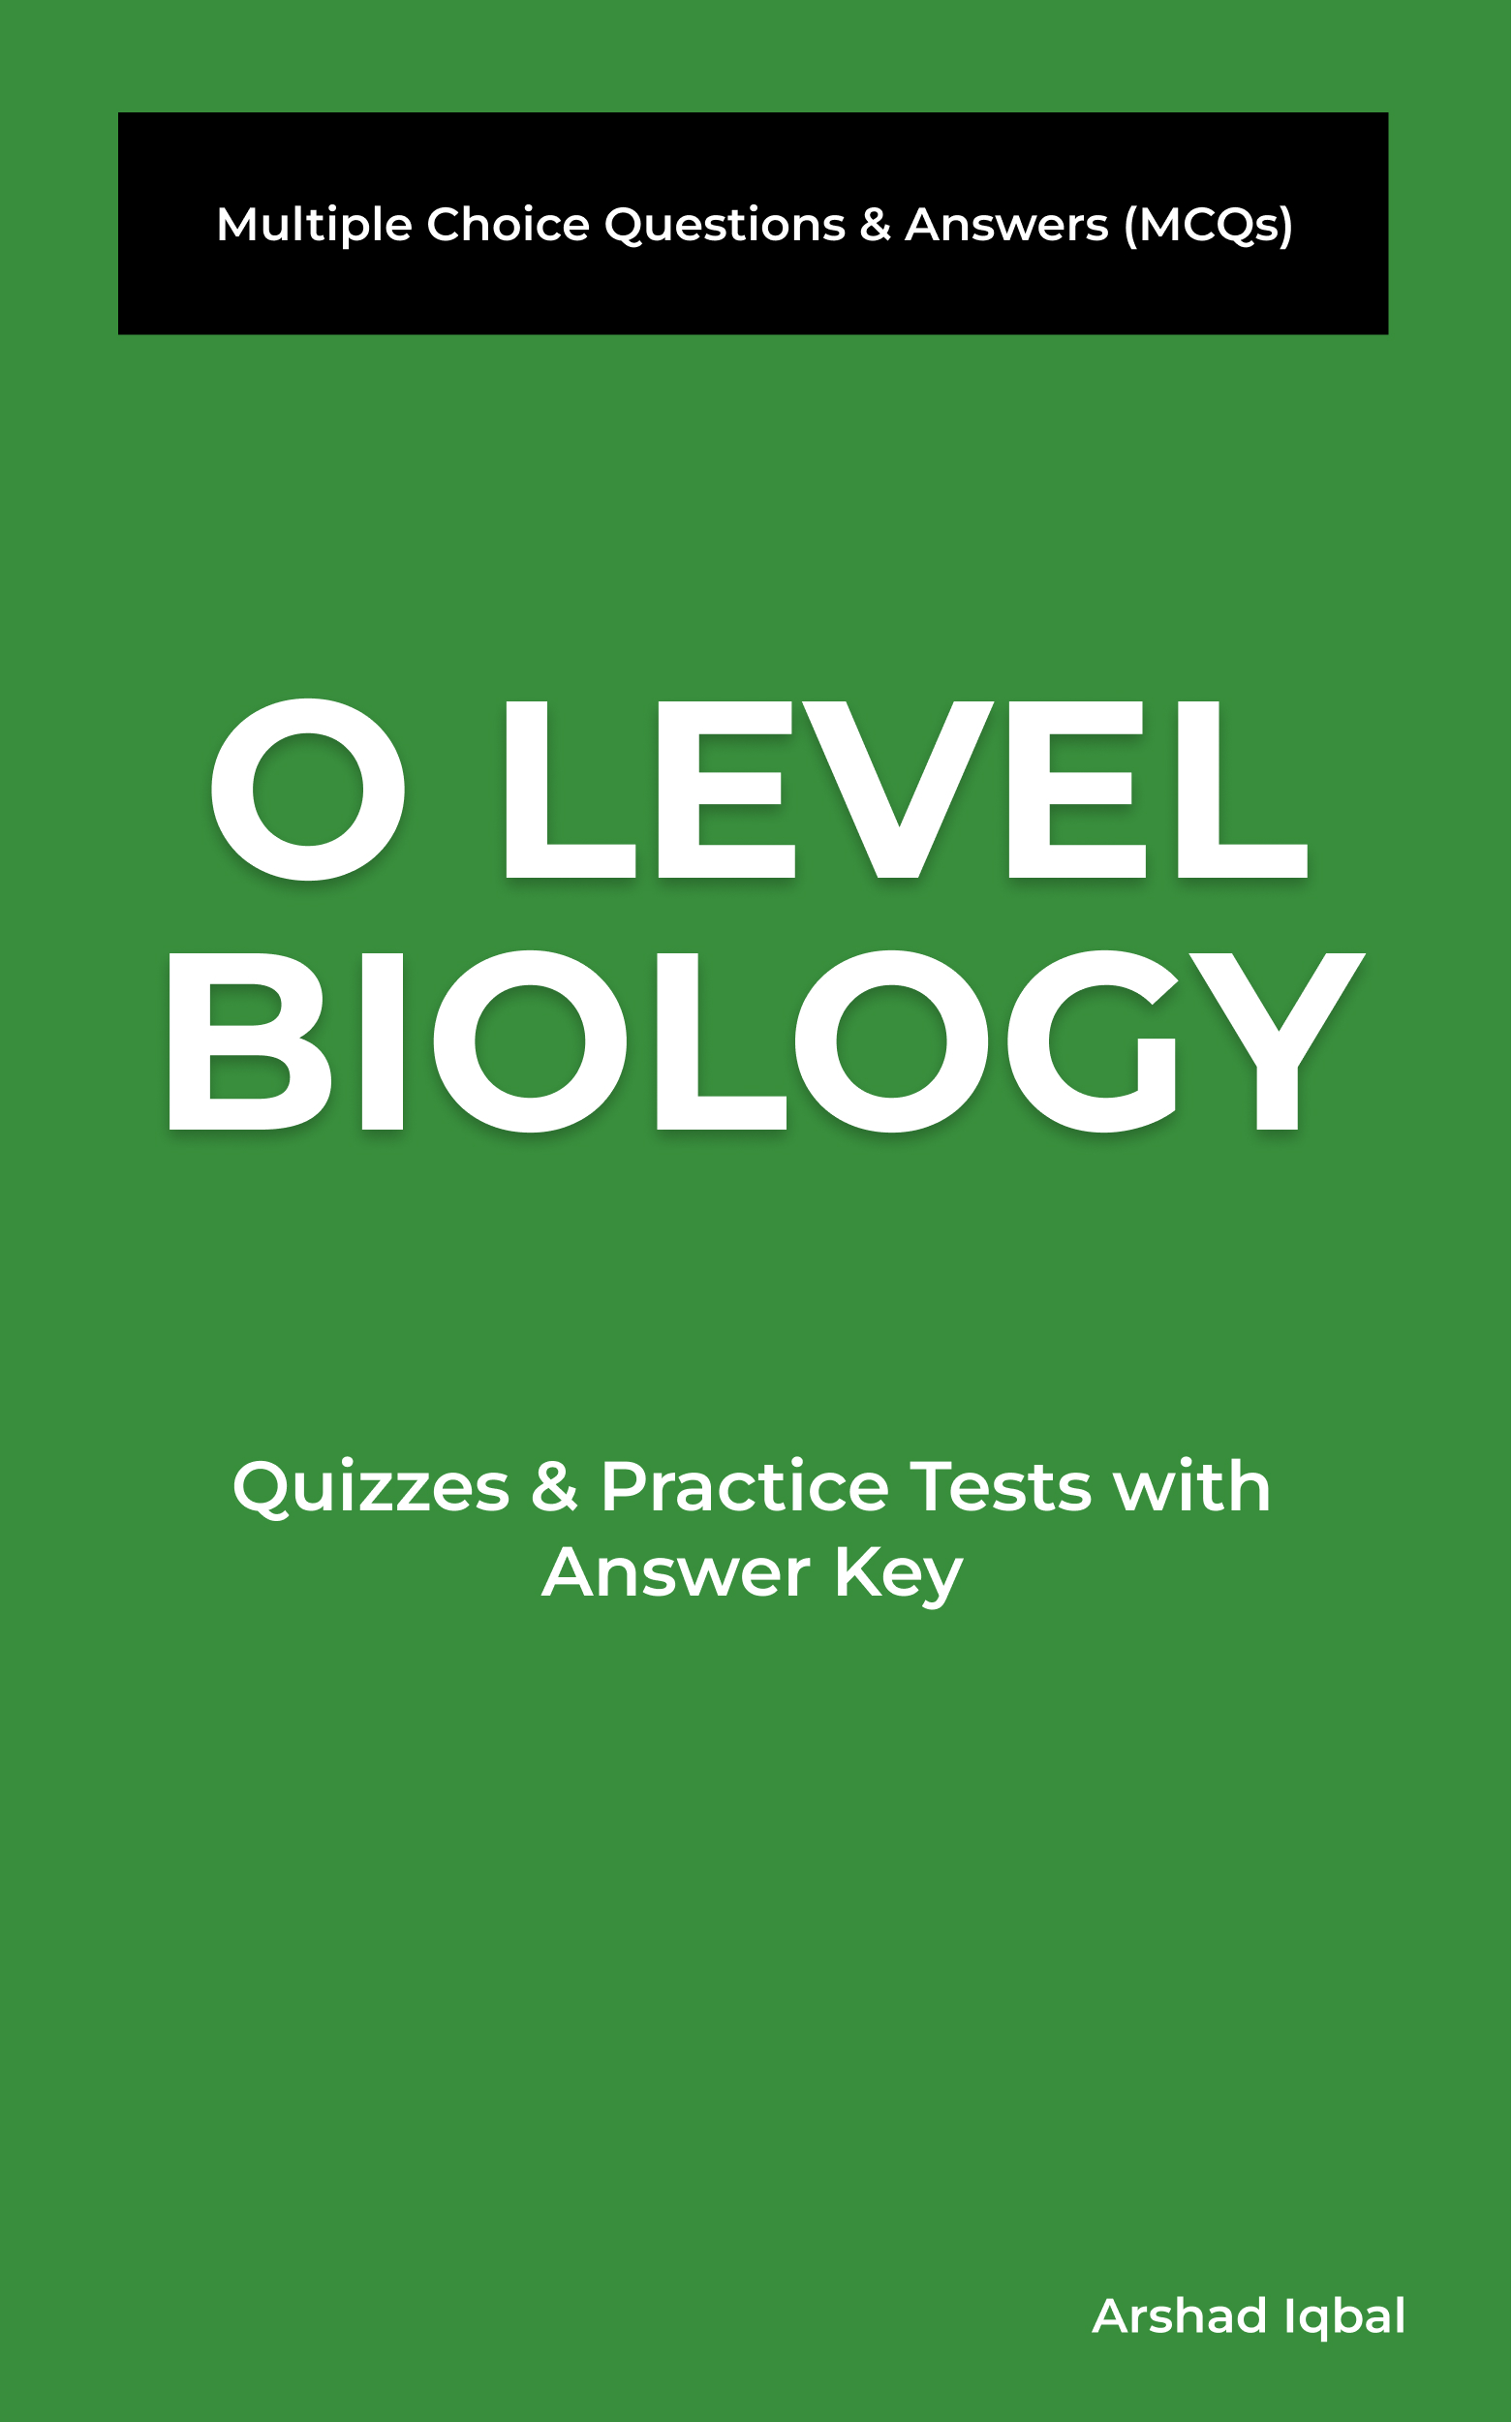 O Level Biology Multiple Choice Questions and Answers (MCQs): Quizzes & Practice Tests with Answer Key